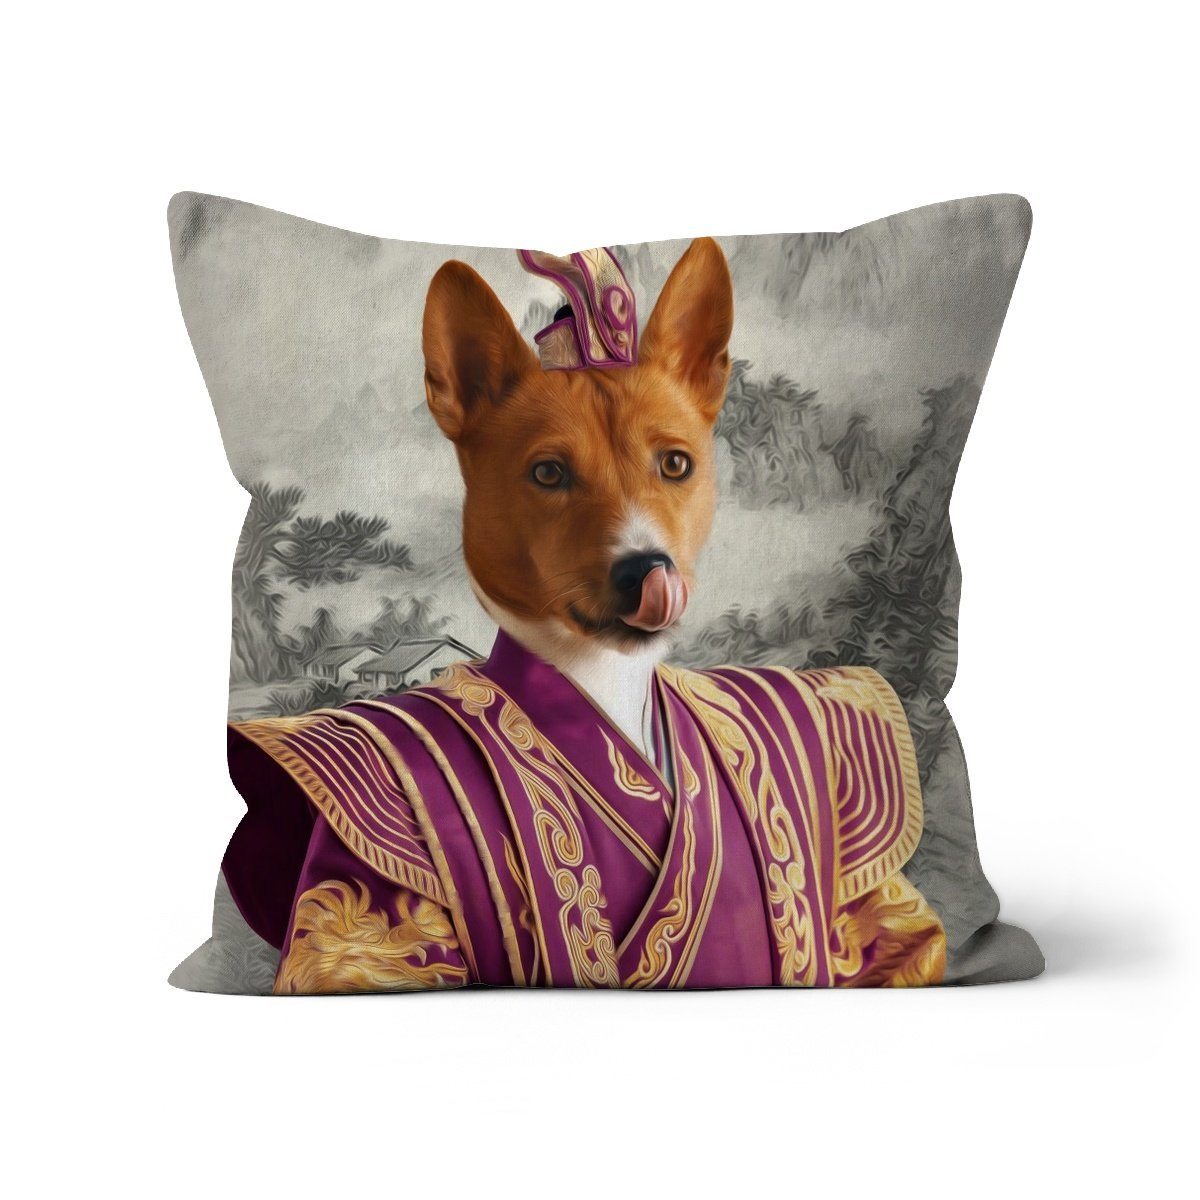 The Chinese Emperor: Custom Pet Cushion - Paw & Glory - #pet portraits# - #dog portraits# - #pet portraits uk#paw & glory, custom pet portrait pillow,pillow personalized, pet pillow, pillow custom, personalised dog pillows, personalised pet pillows